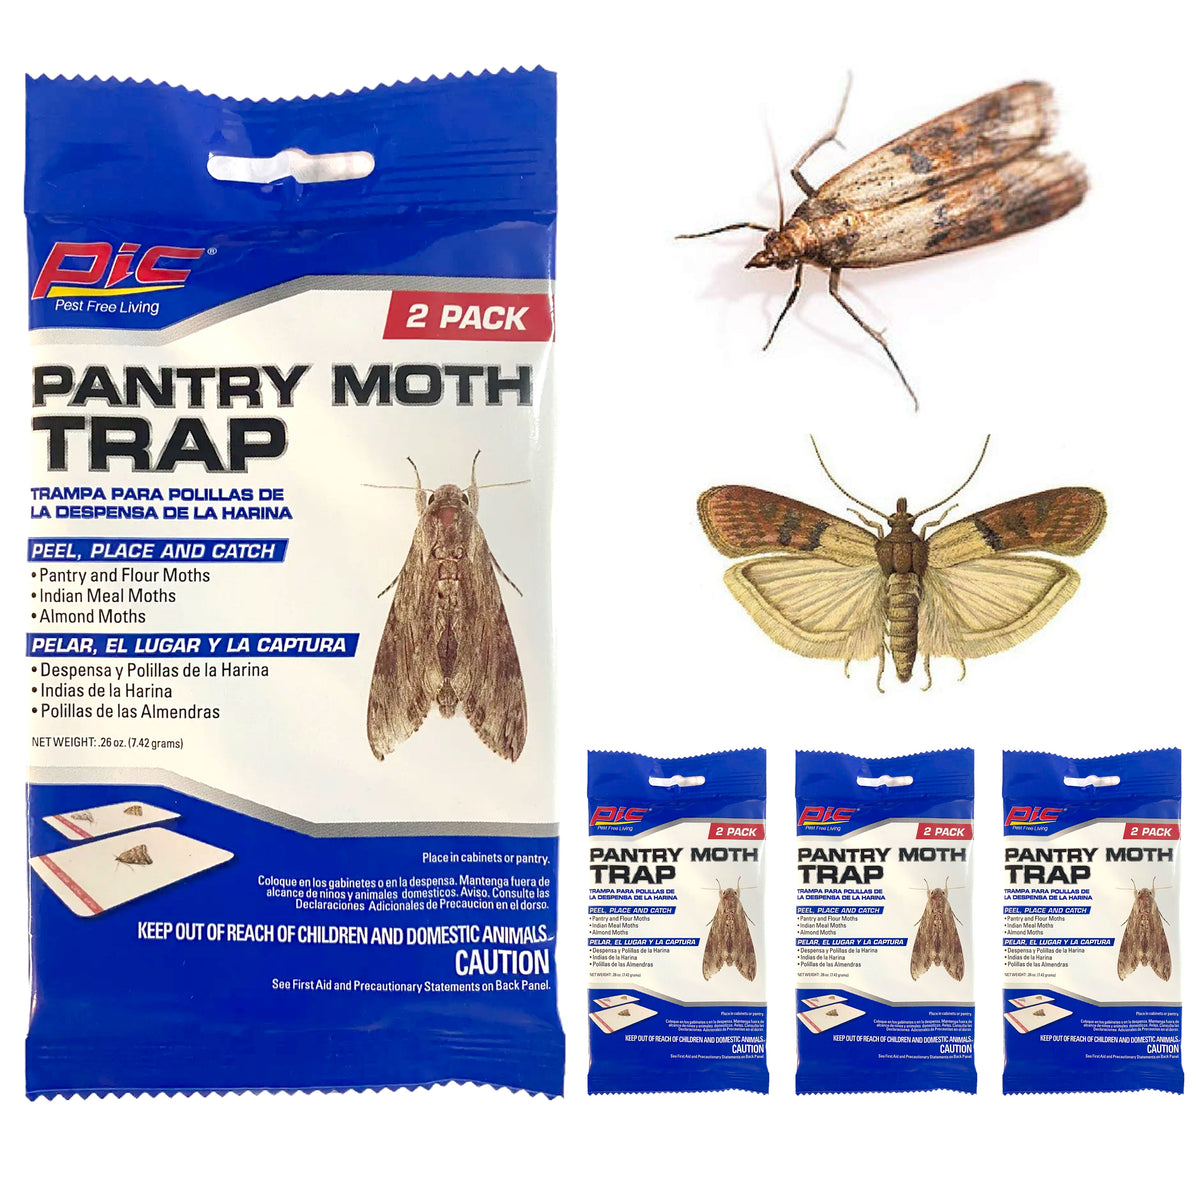 How to Get Rid of Almond Moths [And Other Pantry Moth Species